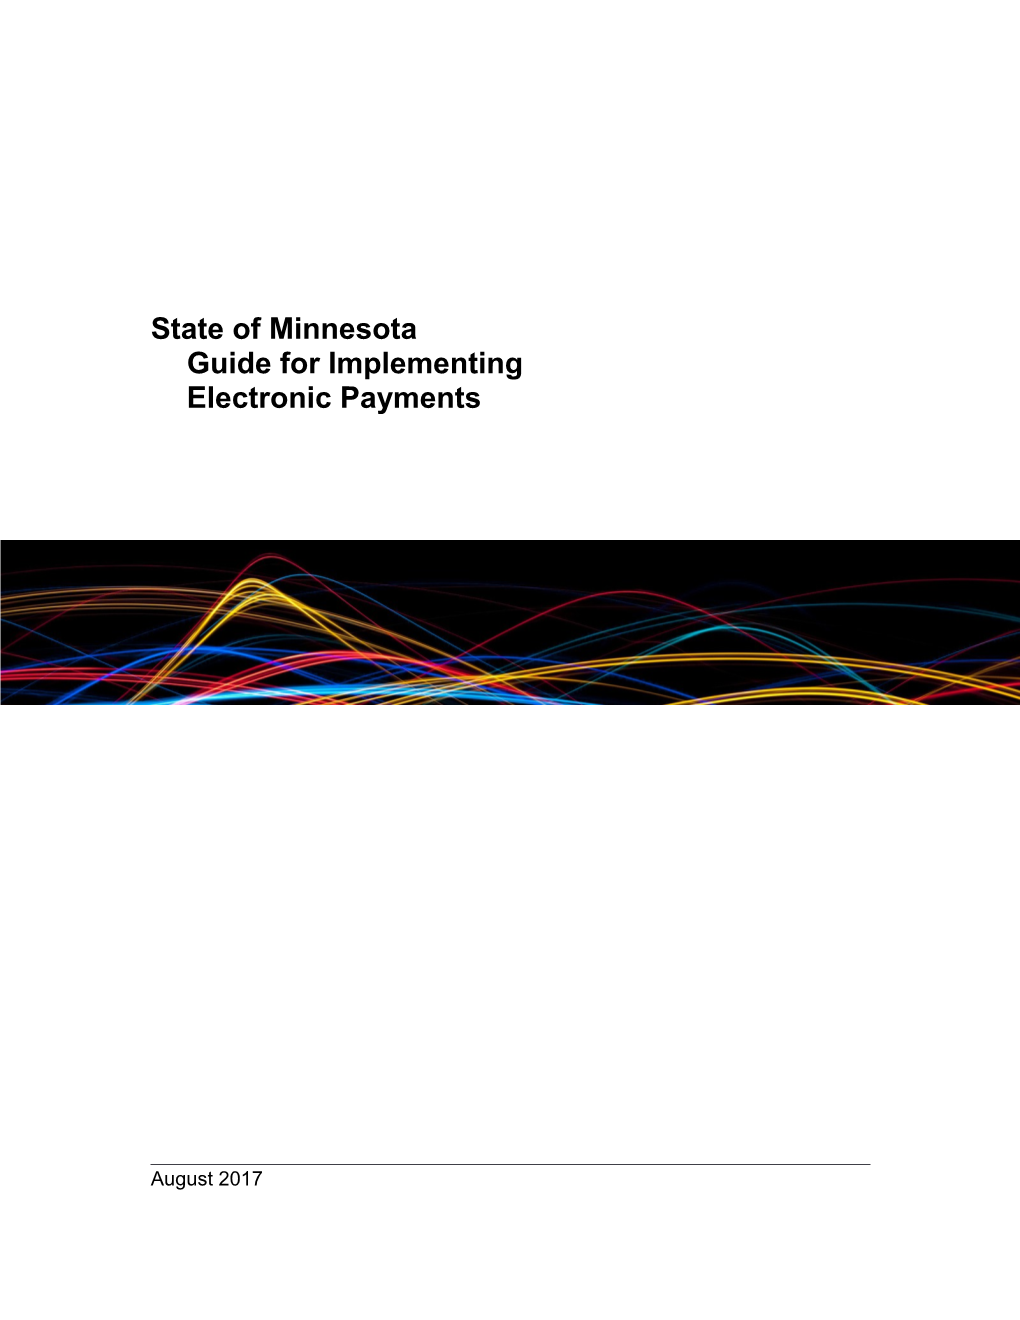 State of Minnesota Guide for Implementing Electronic Payments